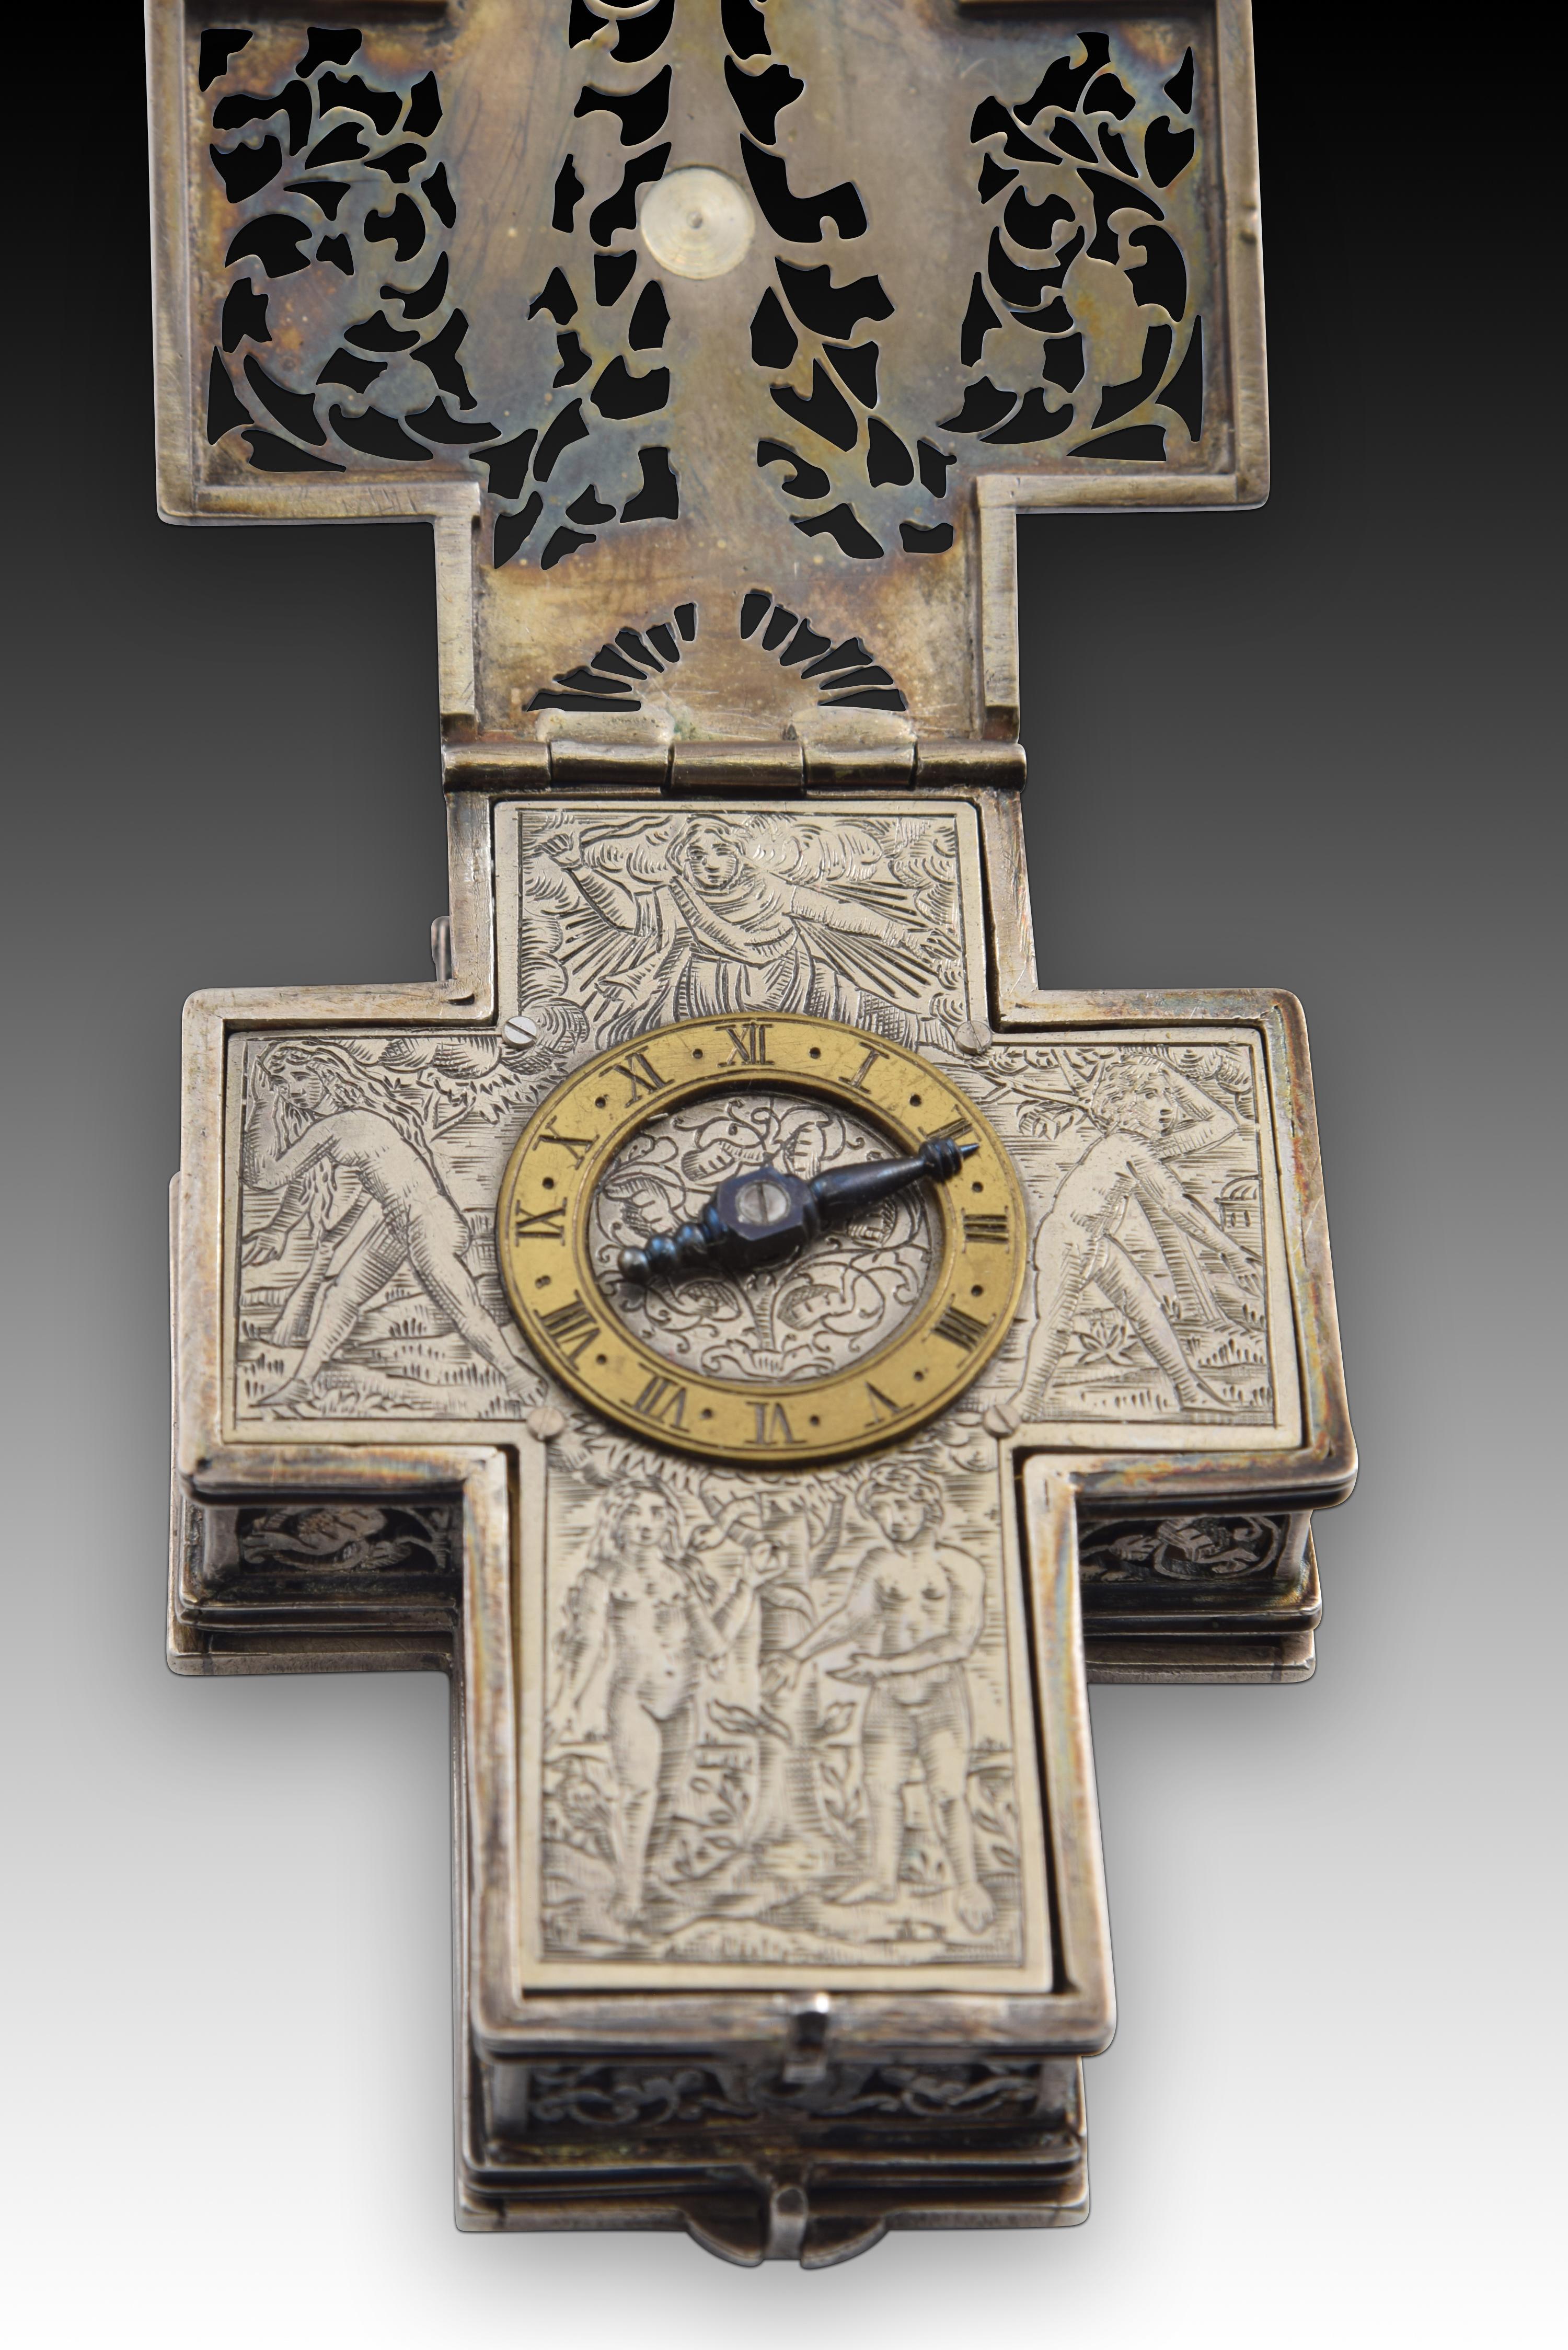 Cross-shaped chest clock. Silver. 17th century. It presents restorations. 
Portable clock in the shape of a cross with an openwork exterior showing Christian figurative scenes and the movement inside, a dial with a golden band with Roman numerals